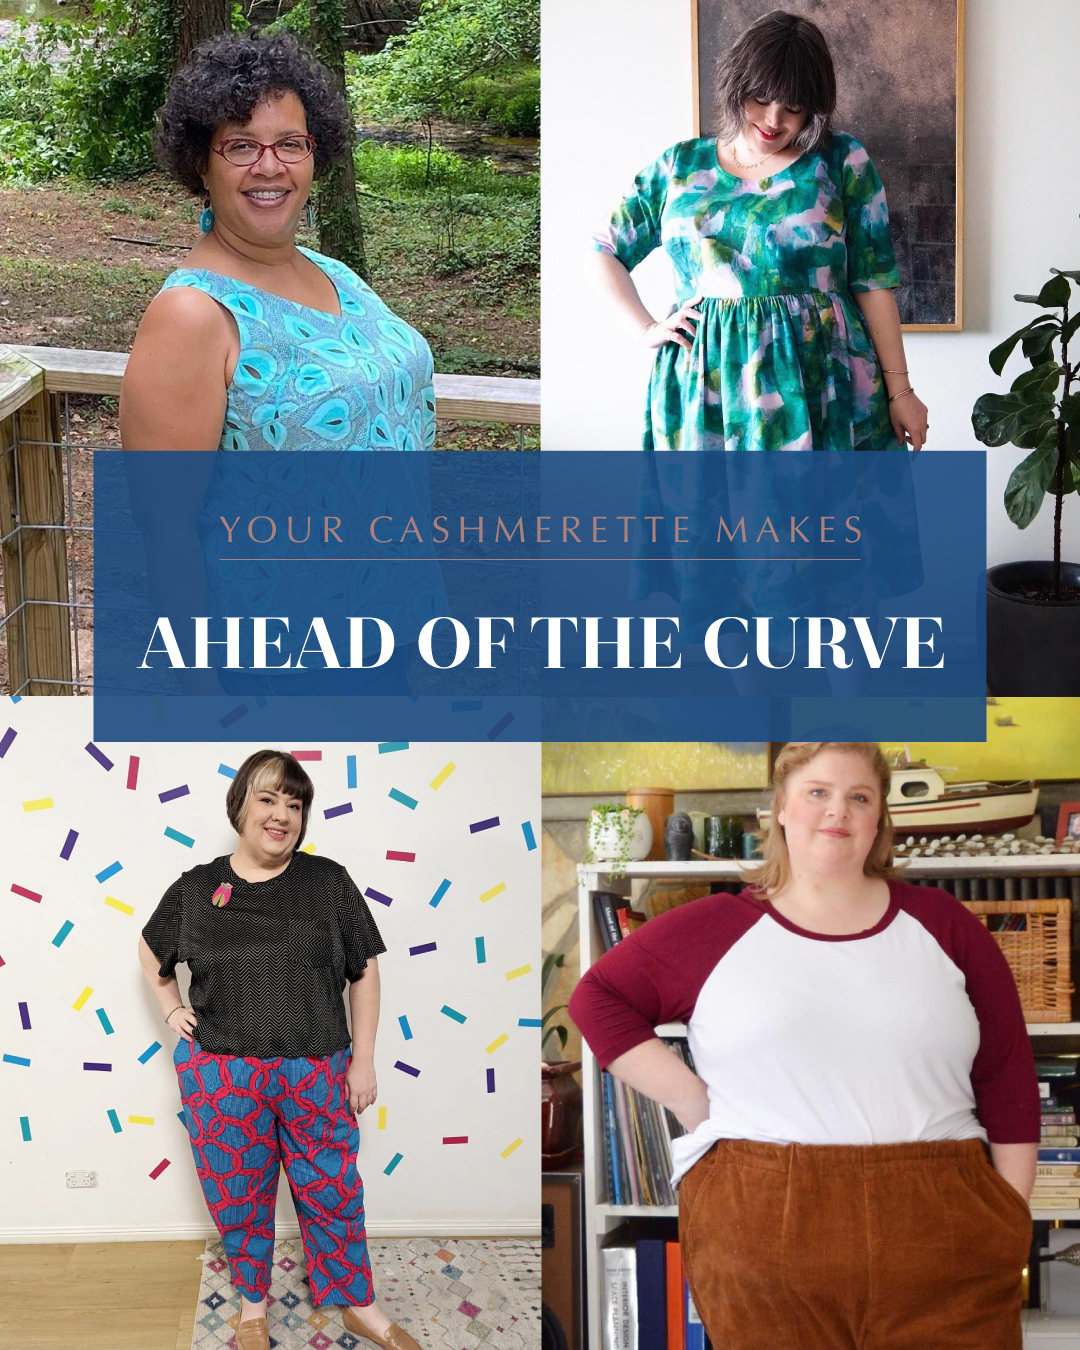 Support your curves with a fit you'll LUV in our NEW Dream Curve